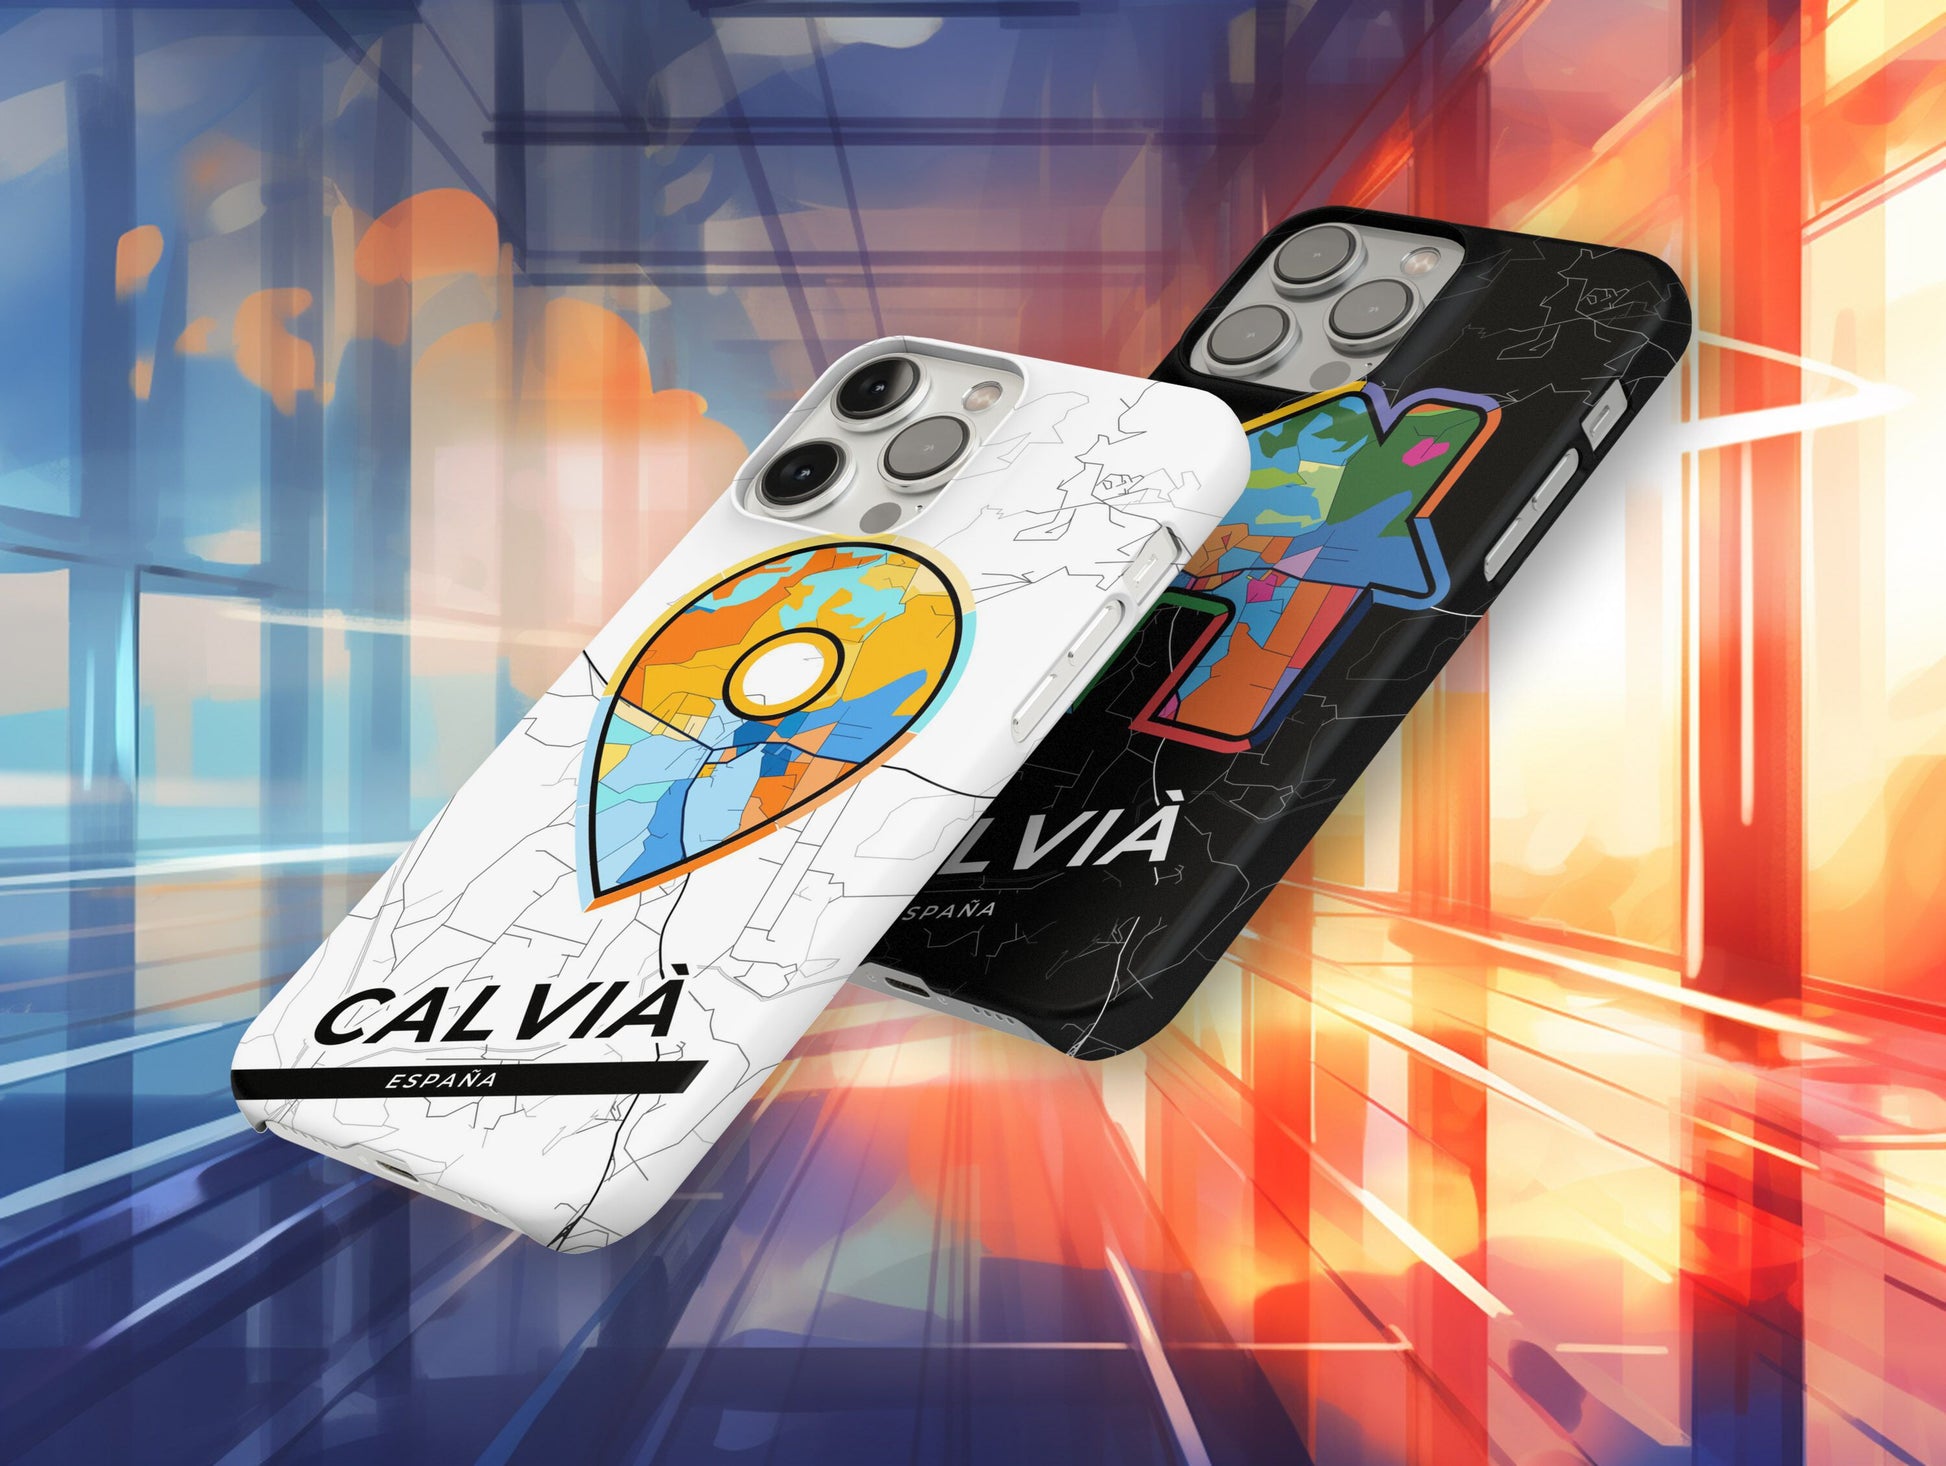 Calvià Spain slim phone case with colorful icon. Birthday, wedding or housewarming gift. Couple match cases.